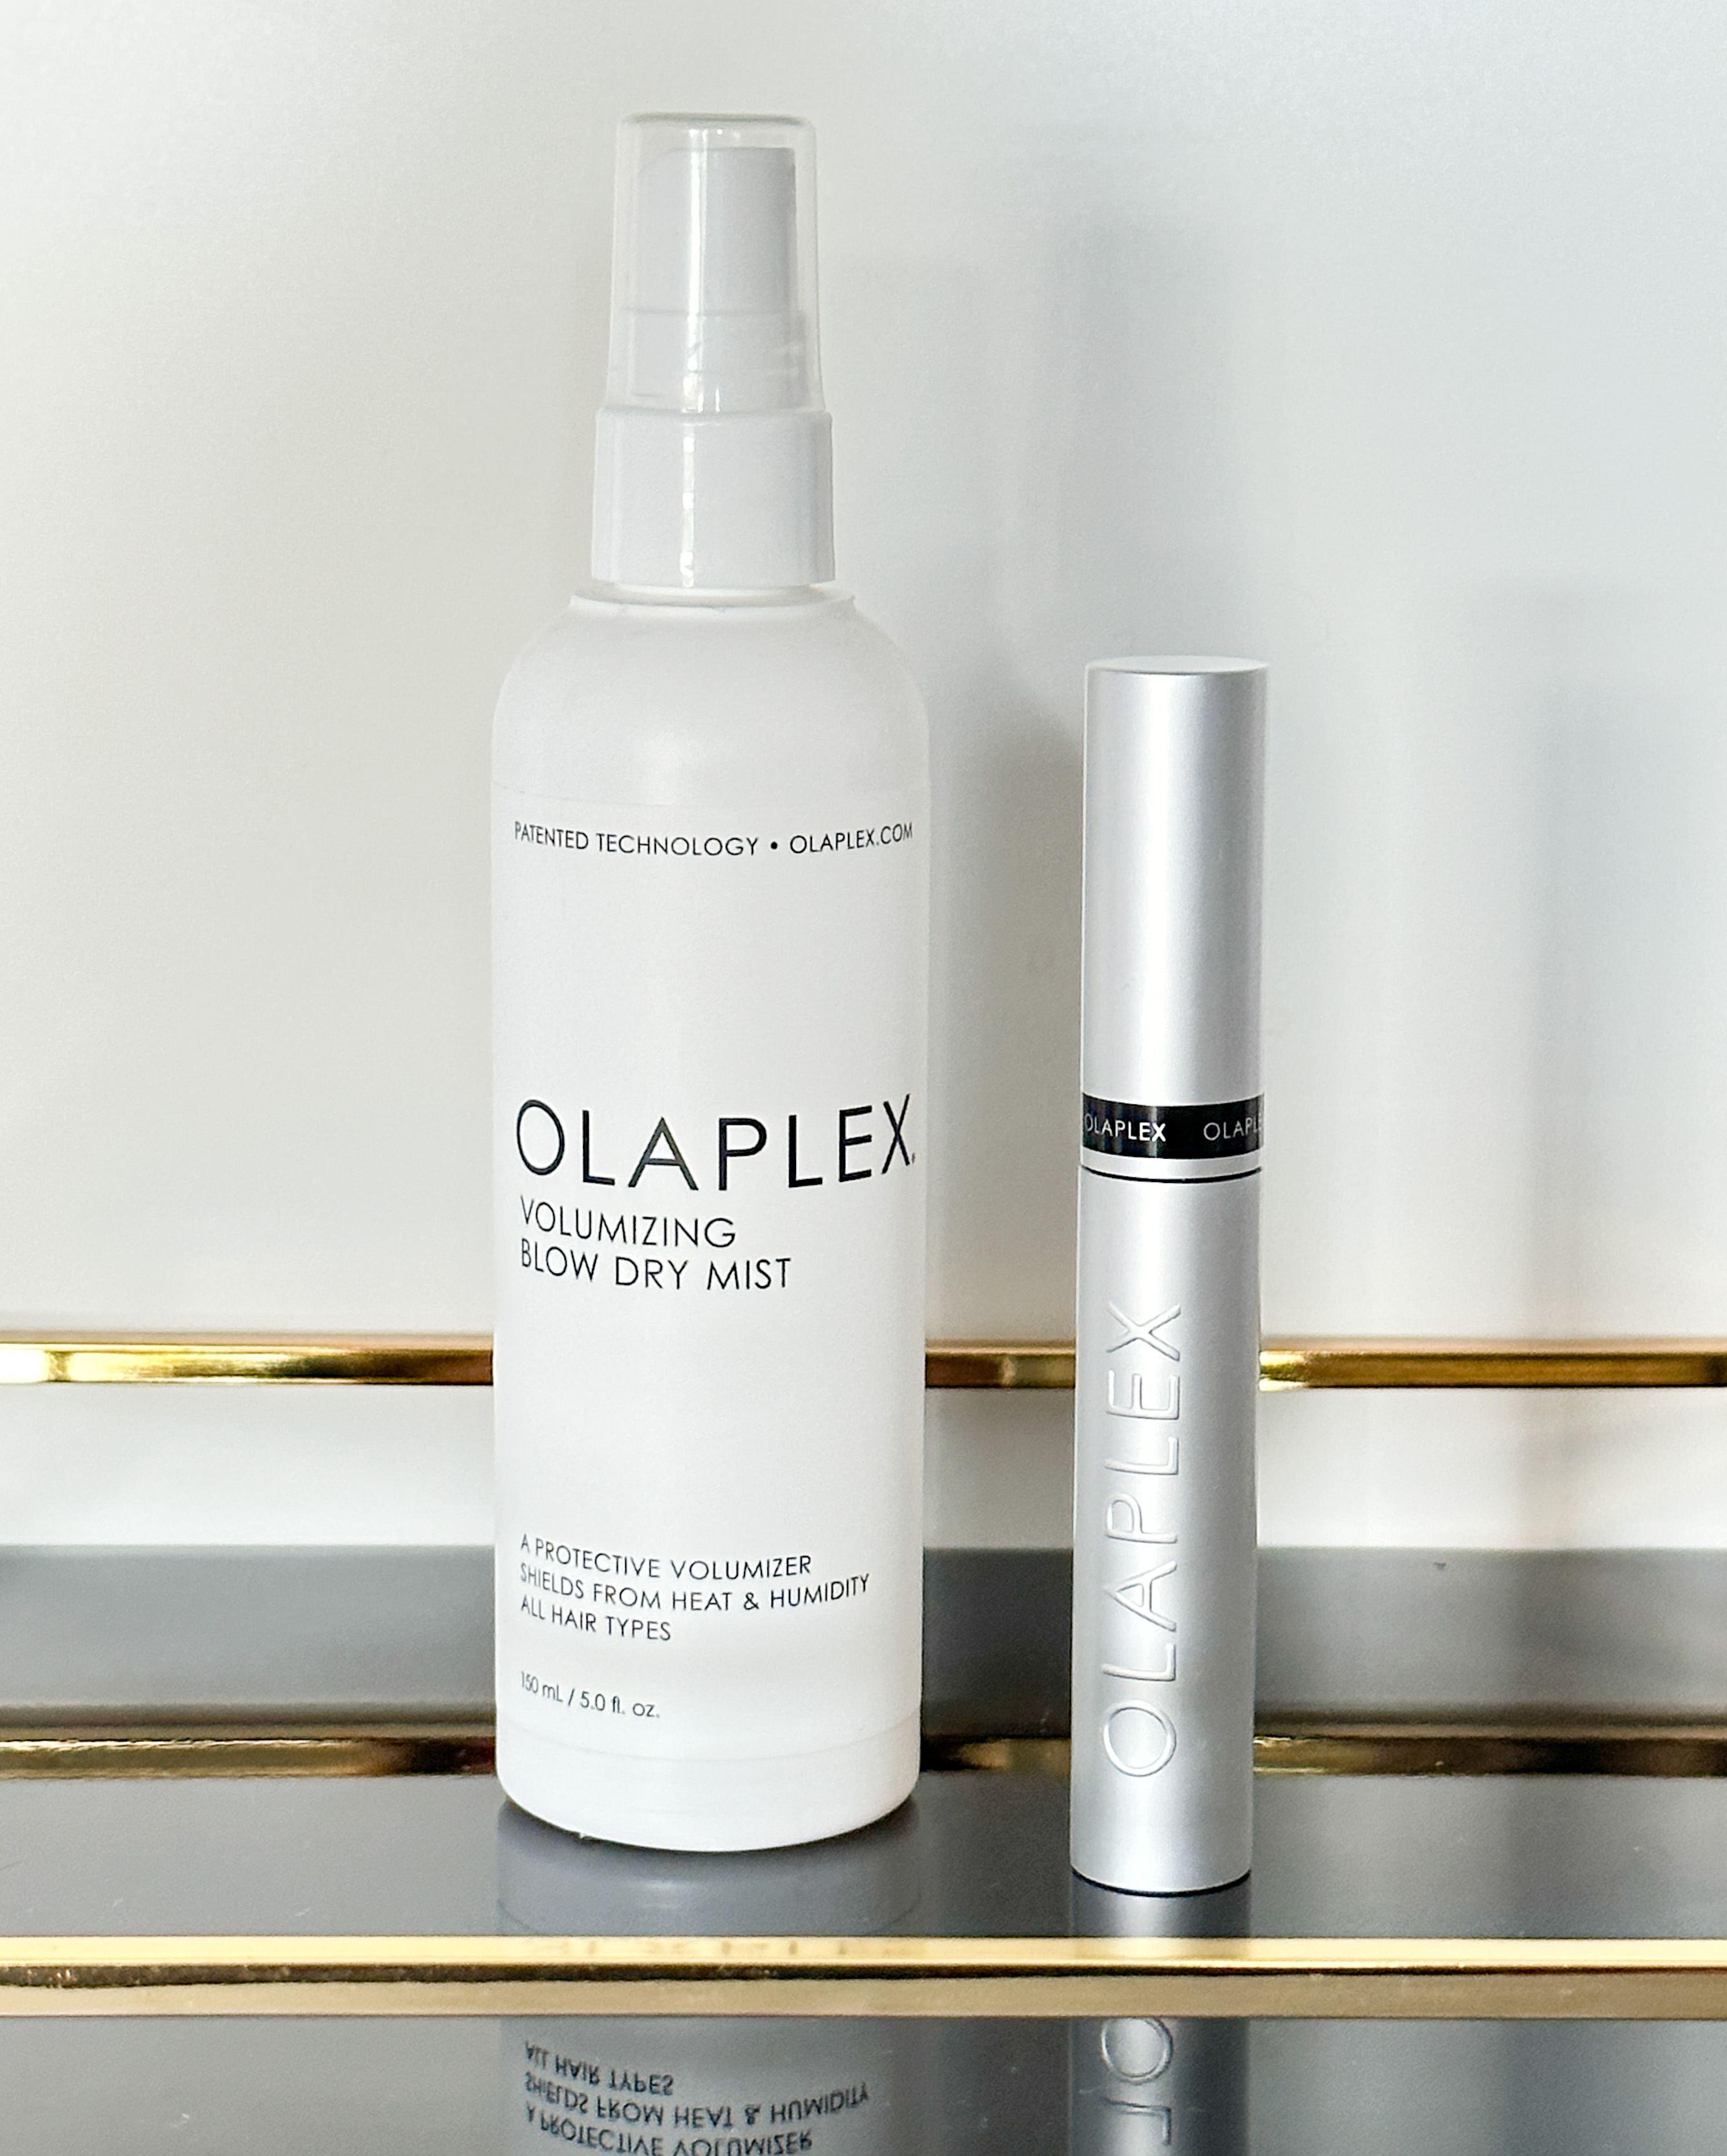 A new love and a disappointment from Olaplex